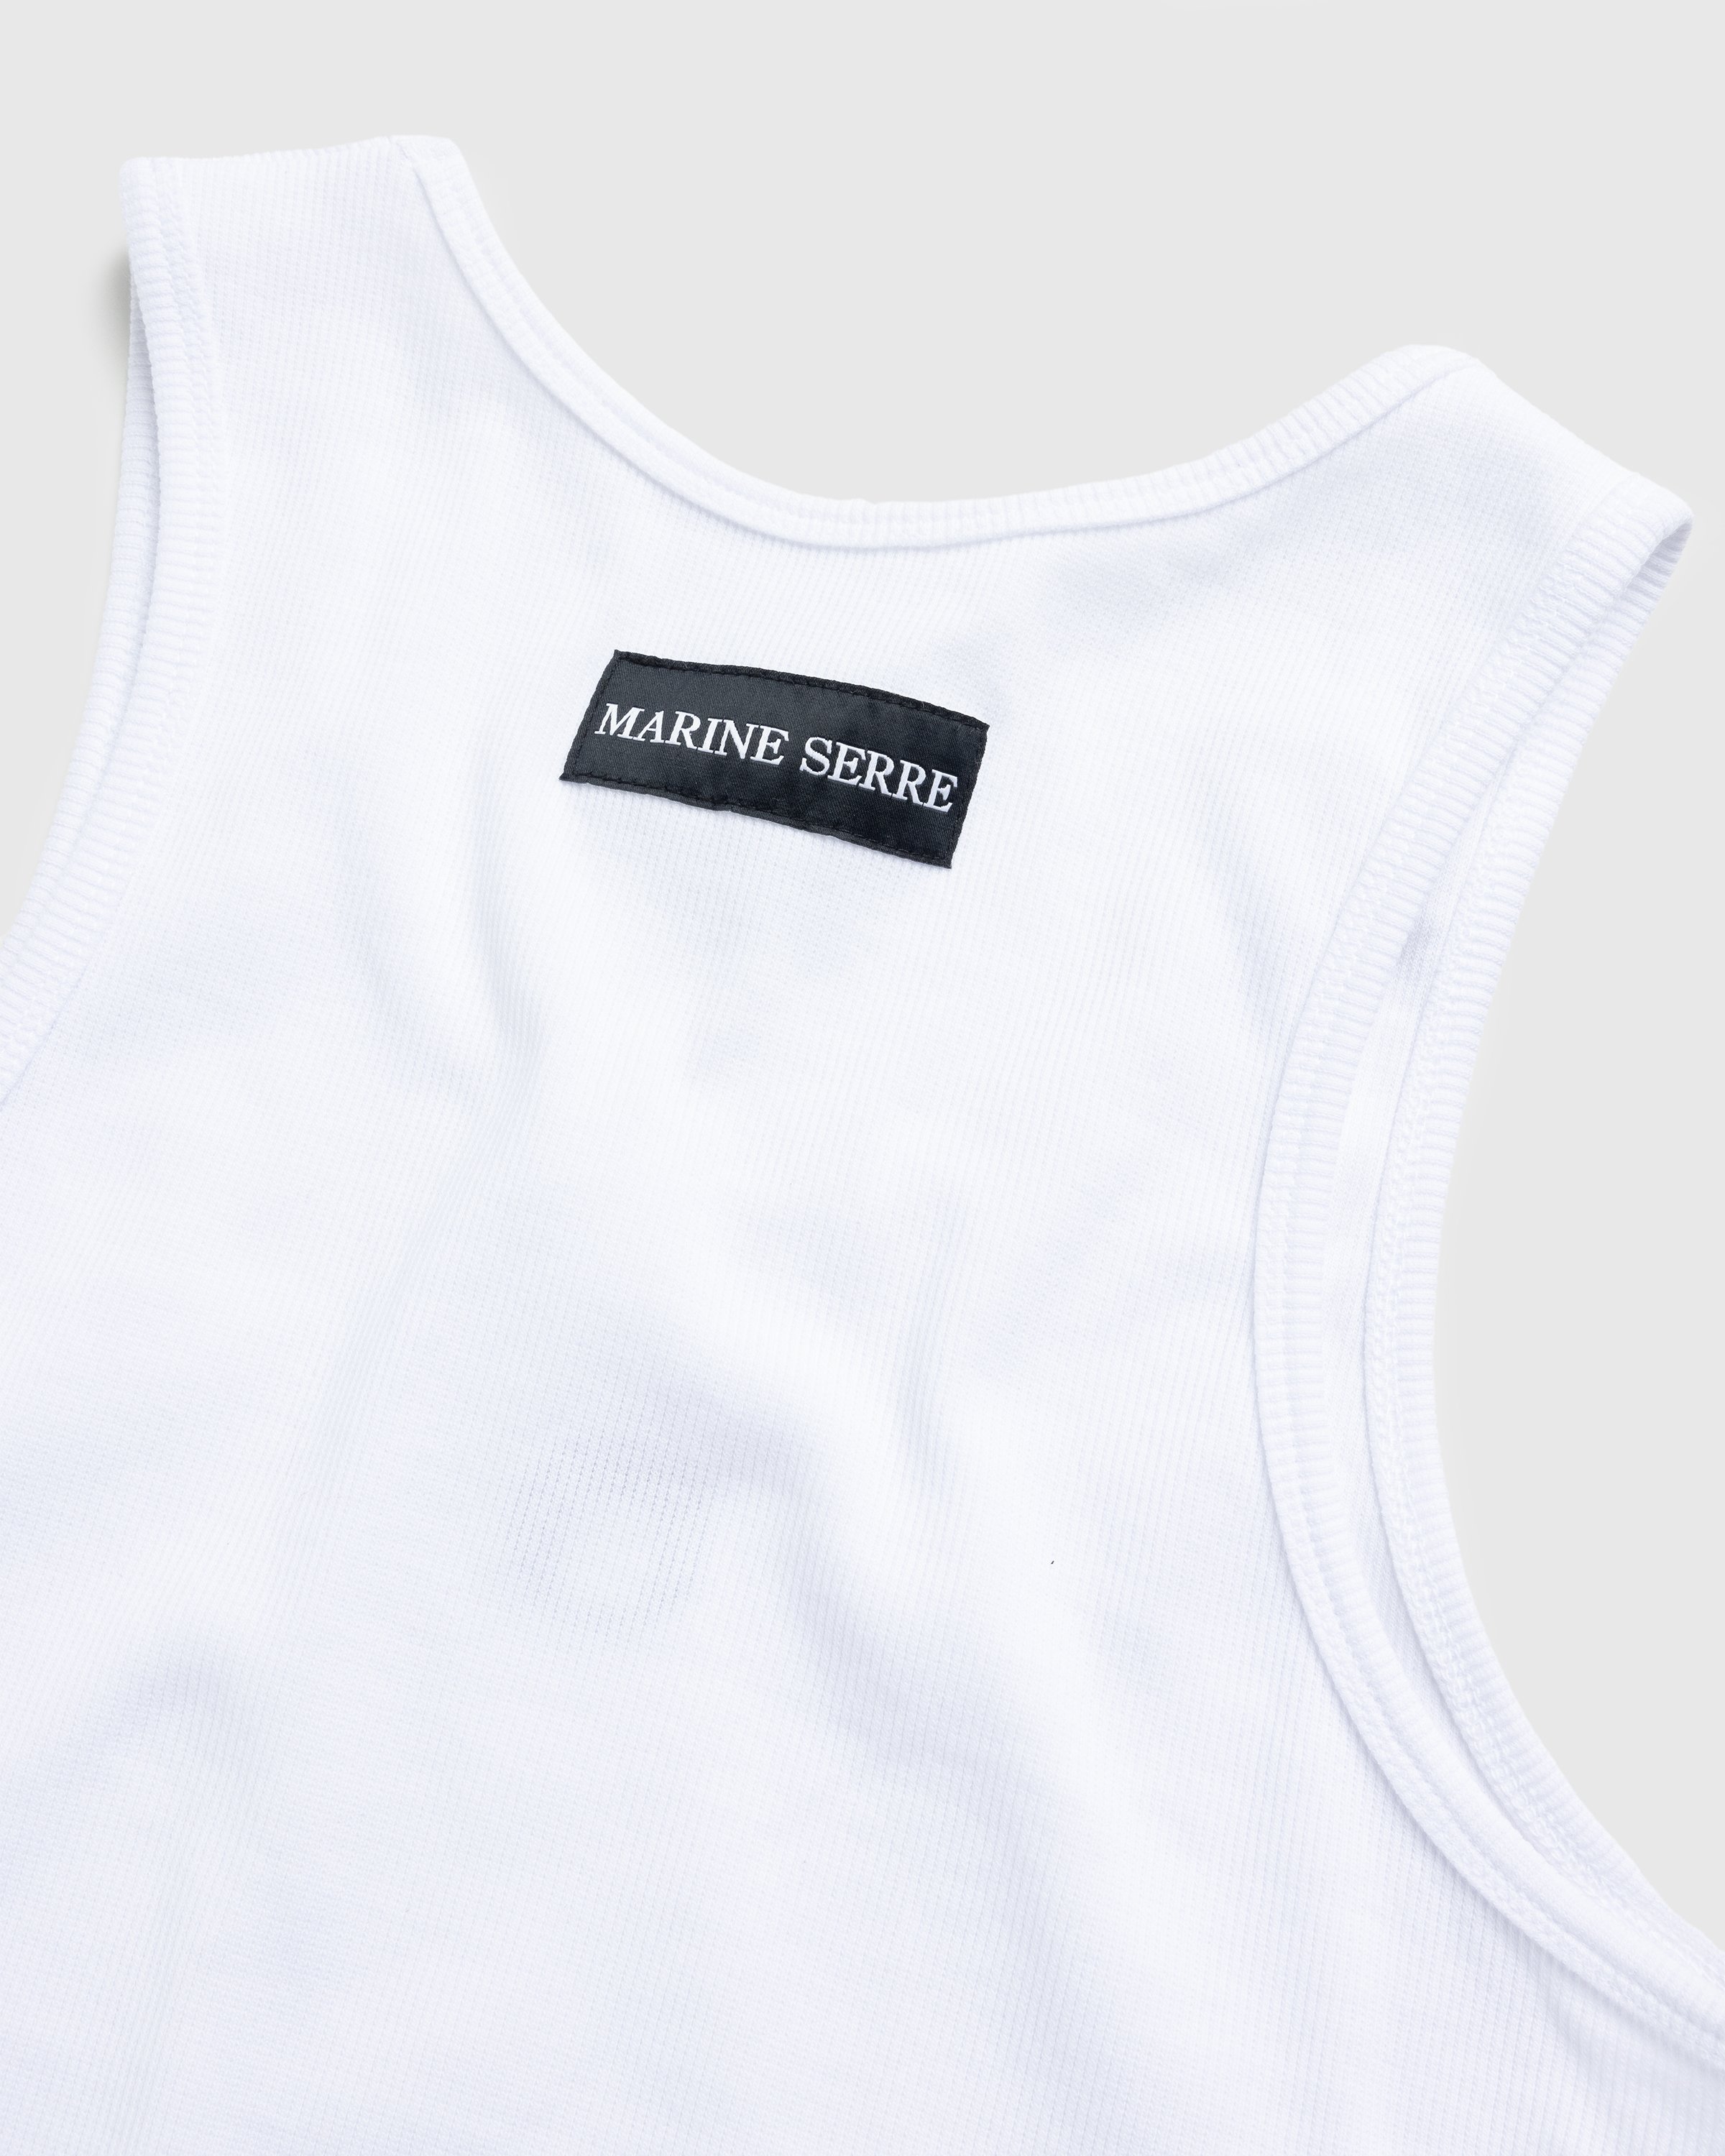 Marine Serre - Organic Cotton Fitted Tank Top White - Clothing - White - Image 6